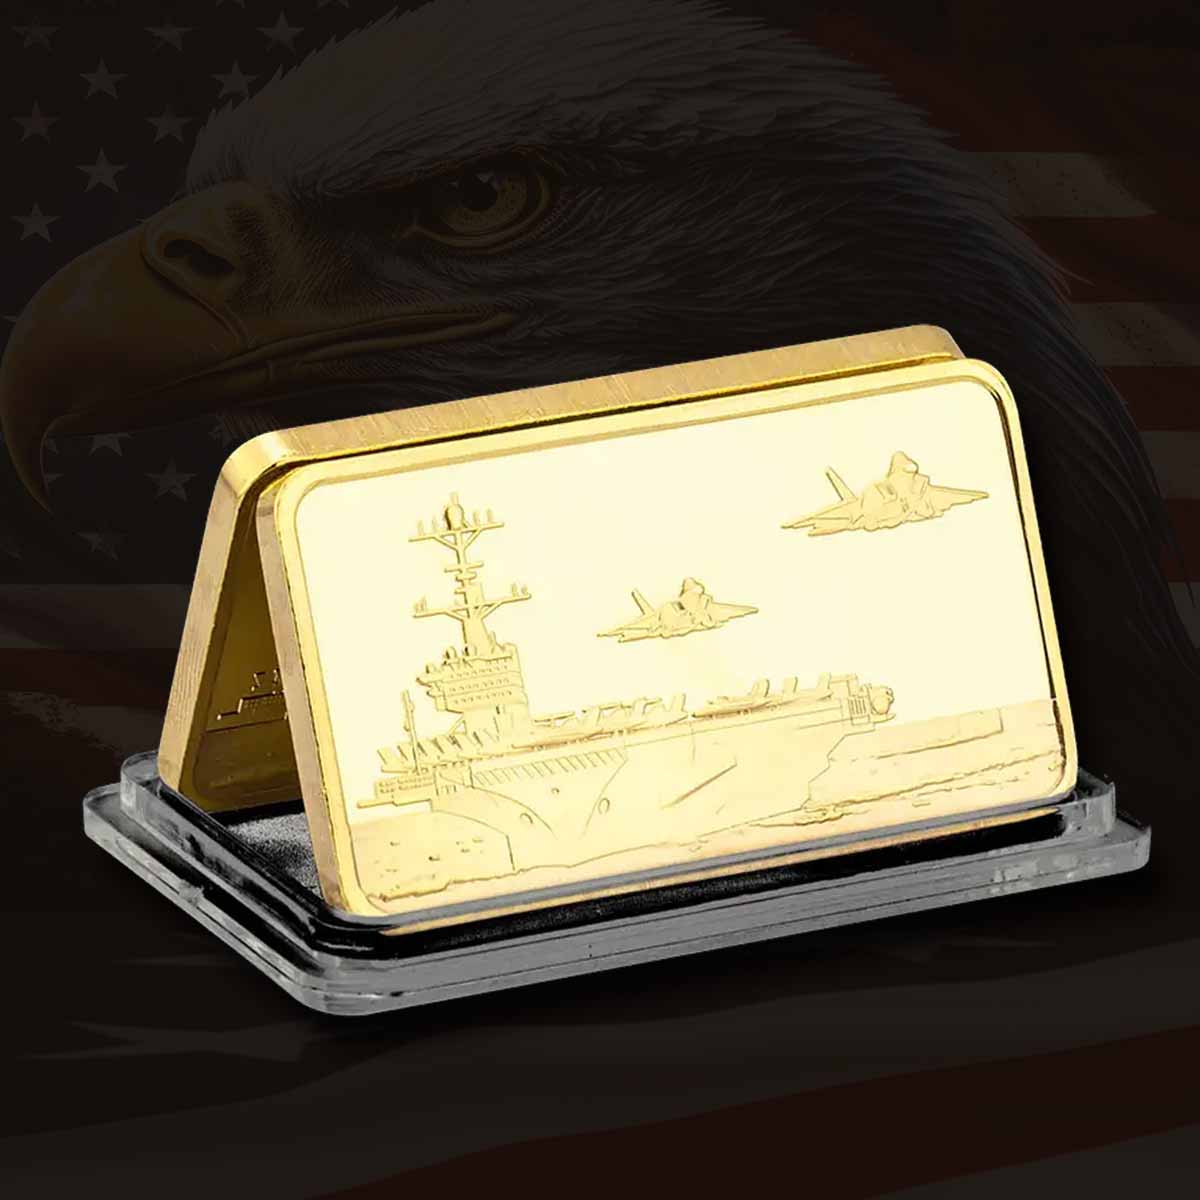 United States Navy Challenge Coin. High-quality Golden plating for a stunning shine and durability. Intricate desig with beautiful detailing. Comes in a protective plastic case to preserve its beauty and value. Patriot Gear USA American Outfitters